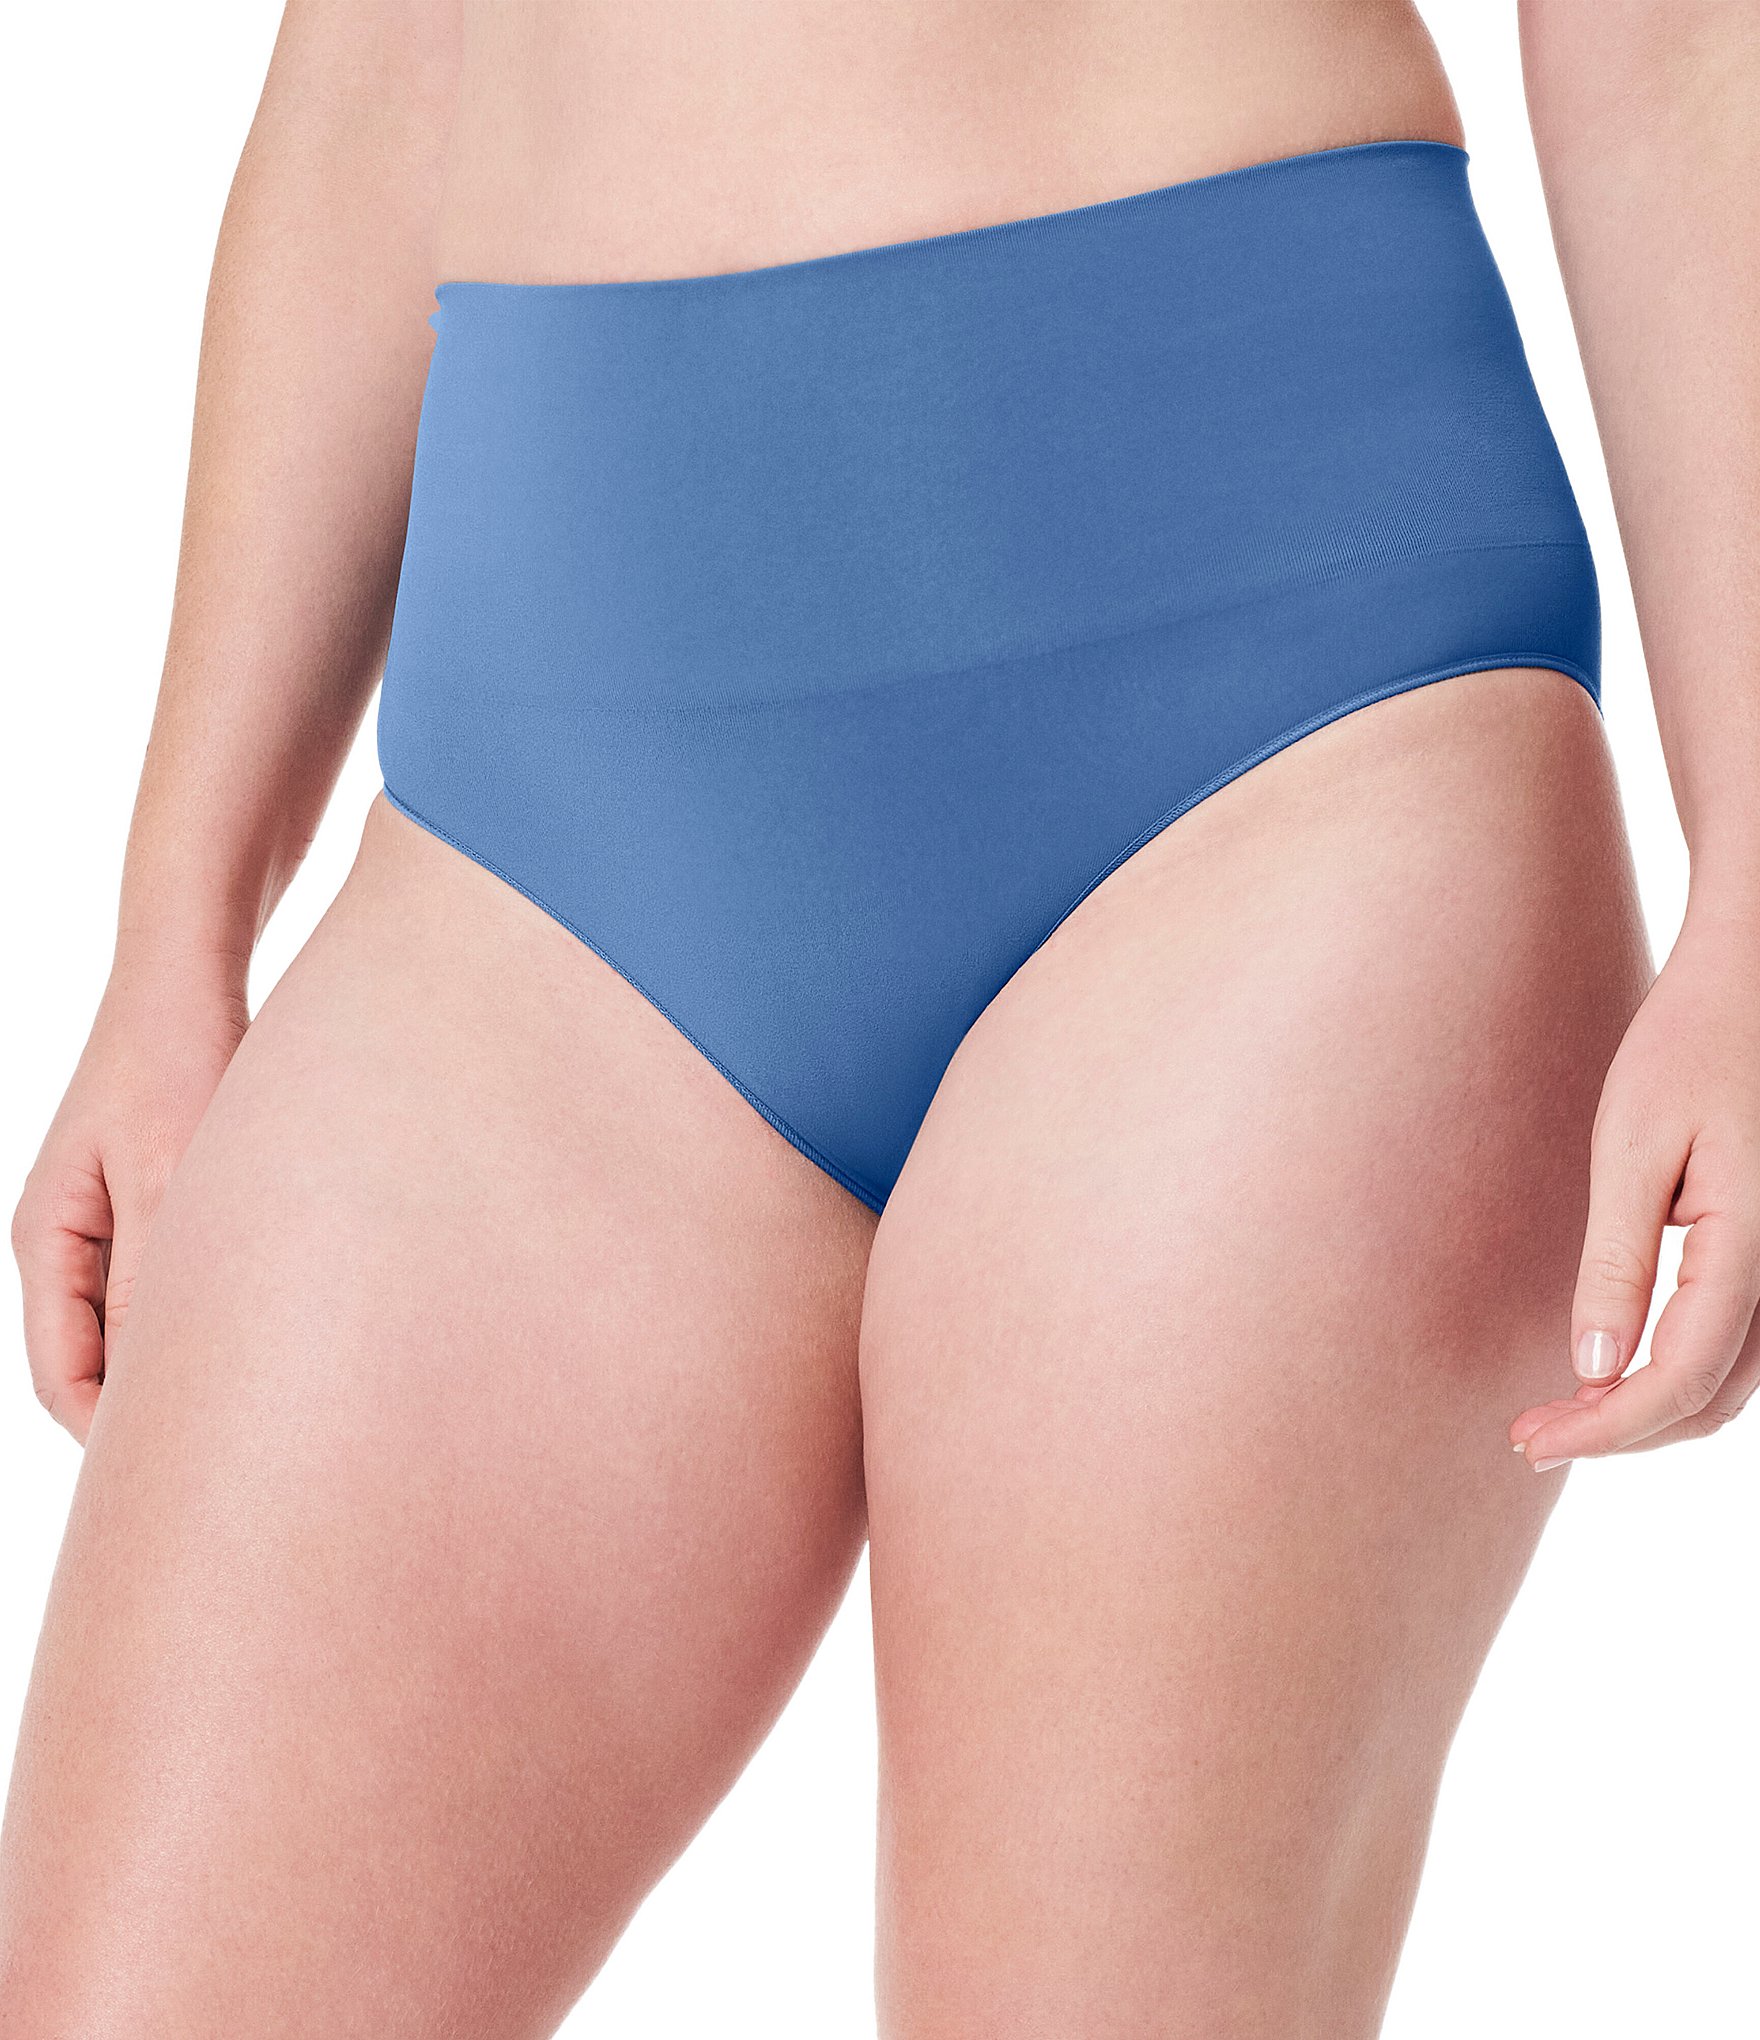 Spanx Breathable Cotton Underwear Review